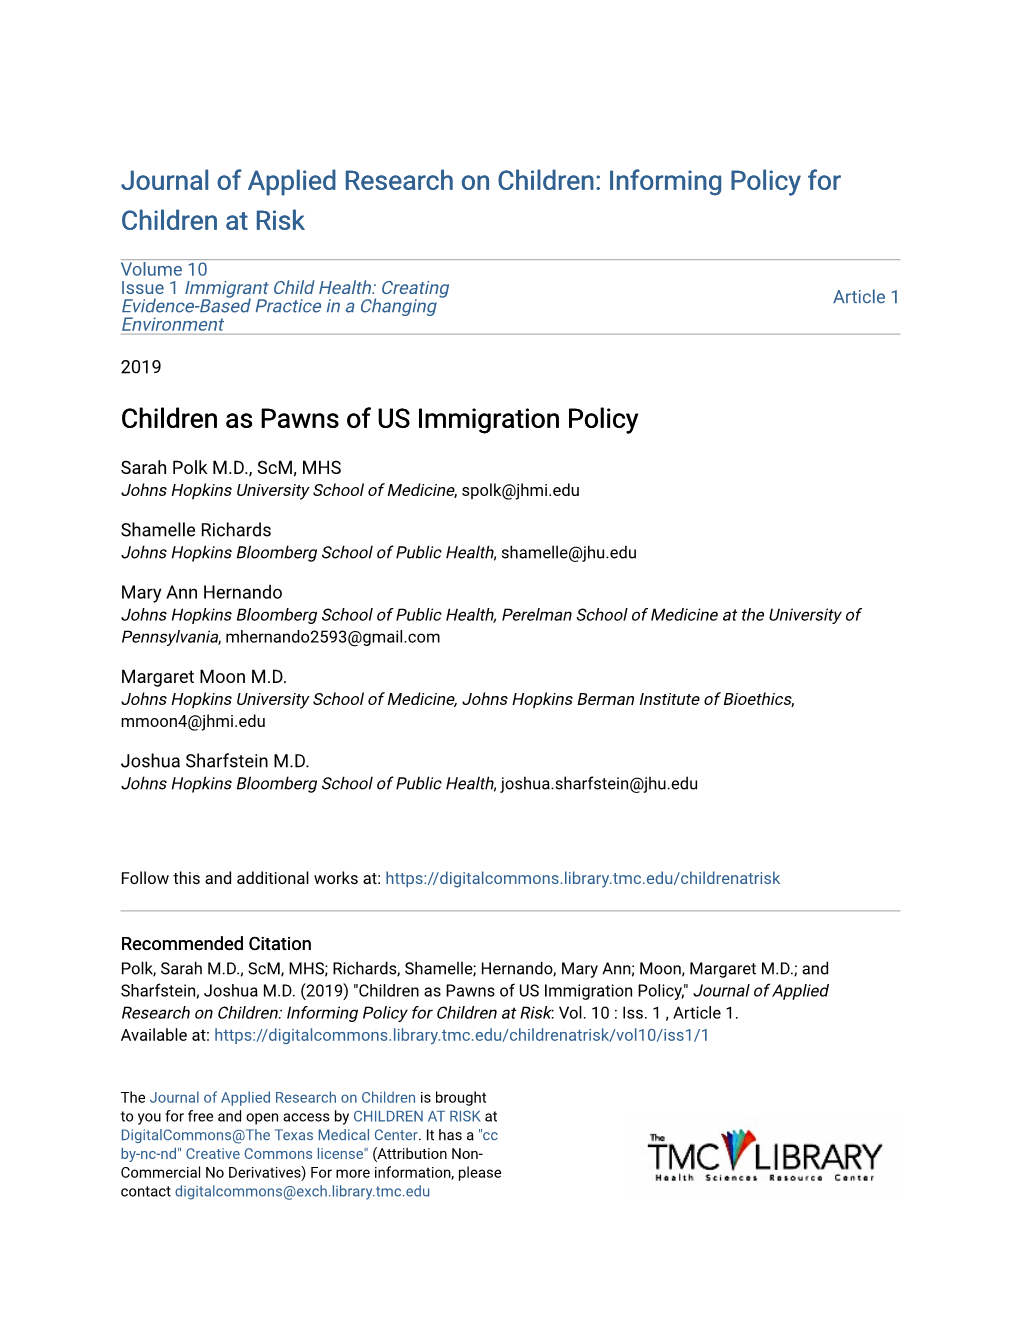 Children As Pawns of US Immigration Policy